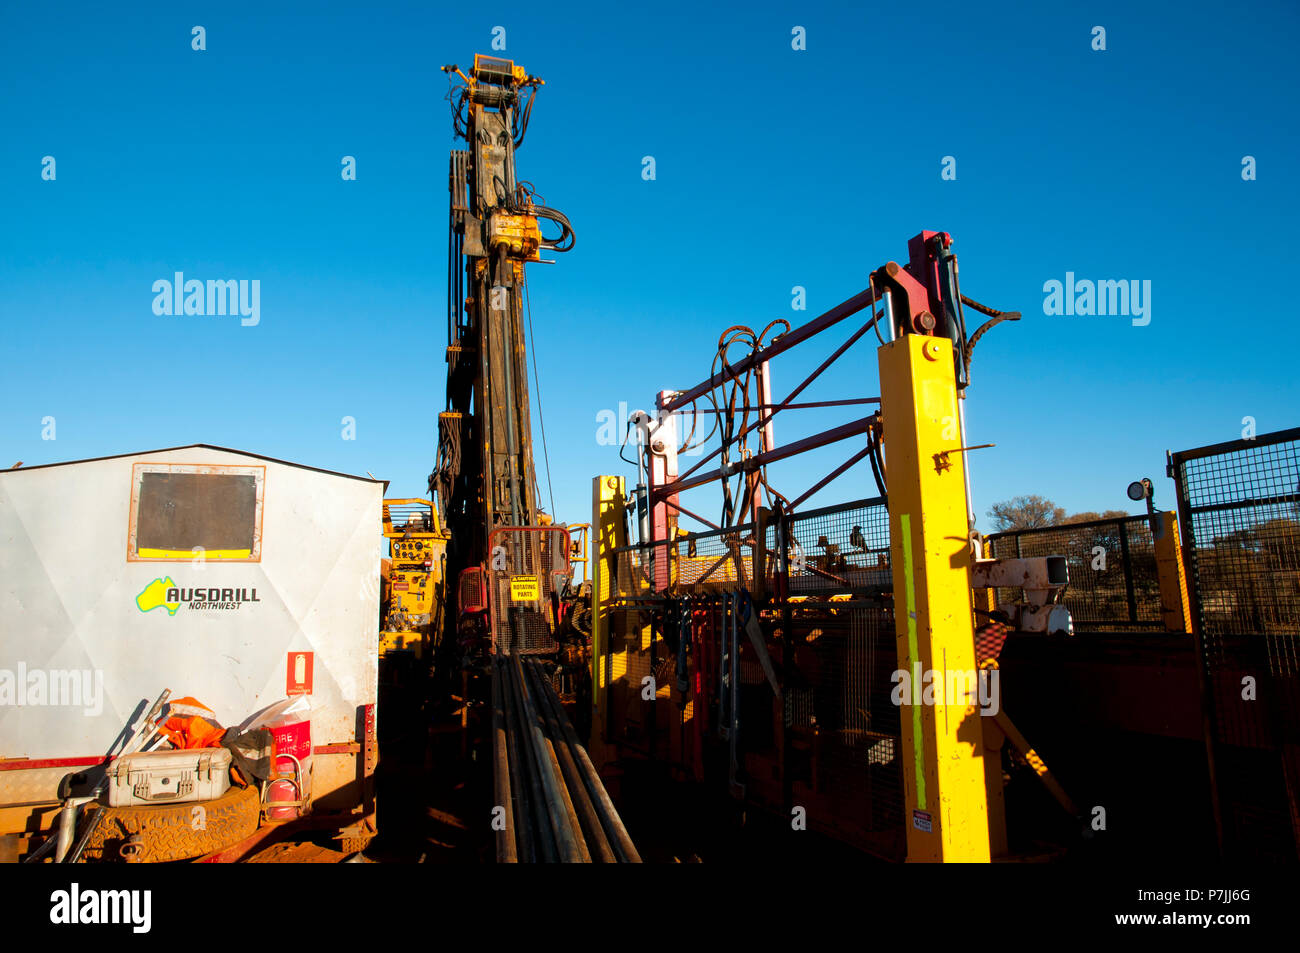 Exploration drilling in the outback by Ausdrill company founded in 1986 Stock Photo